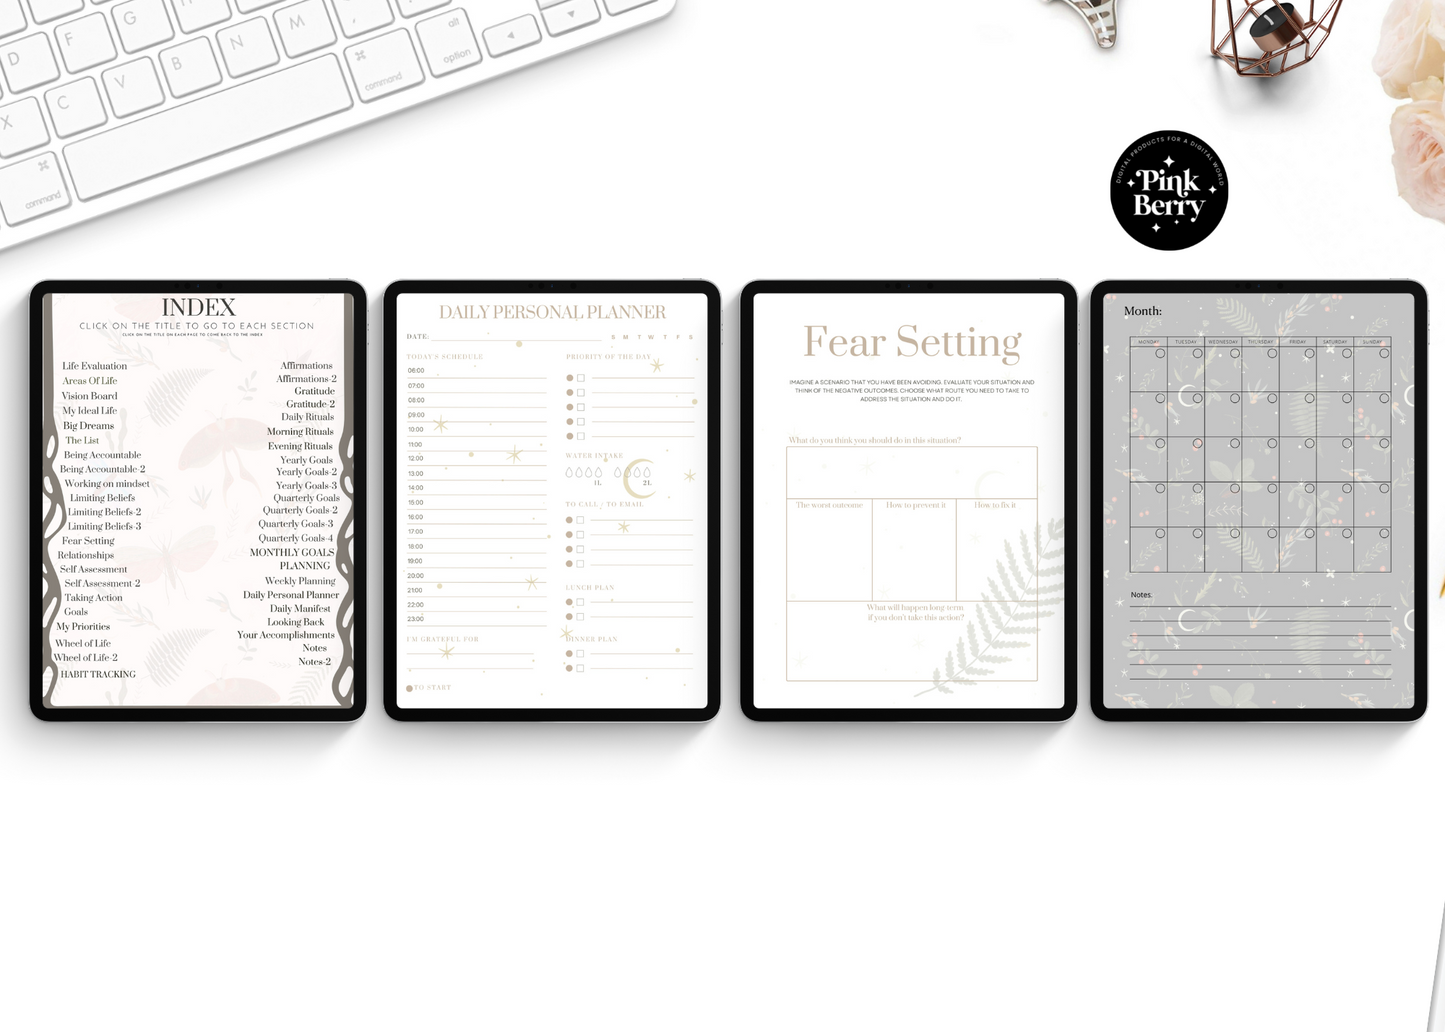 Digital Planners For Goodnotes-Digital Workbook Package- Goodnotes Digital Workbooks For Self Development And Self Therapy-Trauma Healing, Manifestation, Shadow Work, And Self Worth Digital Workbooks